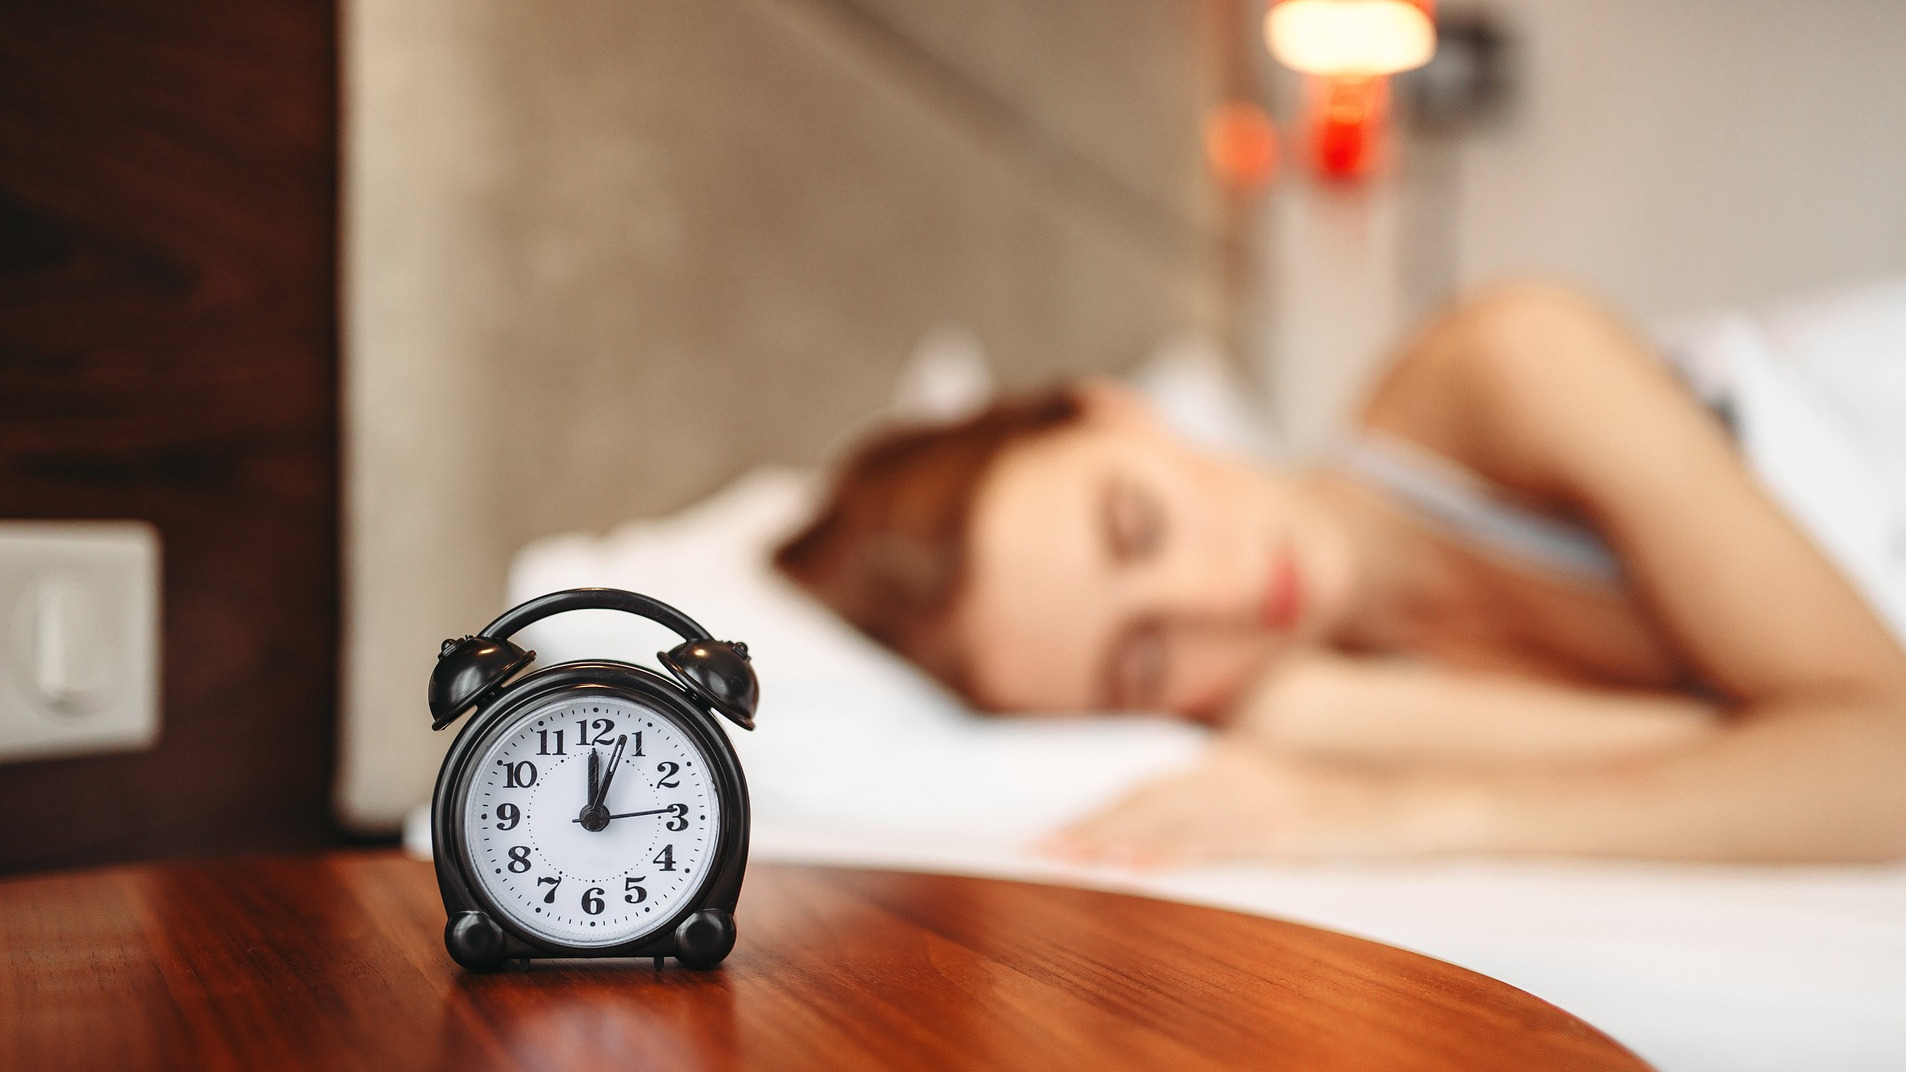 Top 10 Essential Oils for Sleep and Insomnia